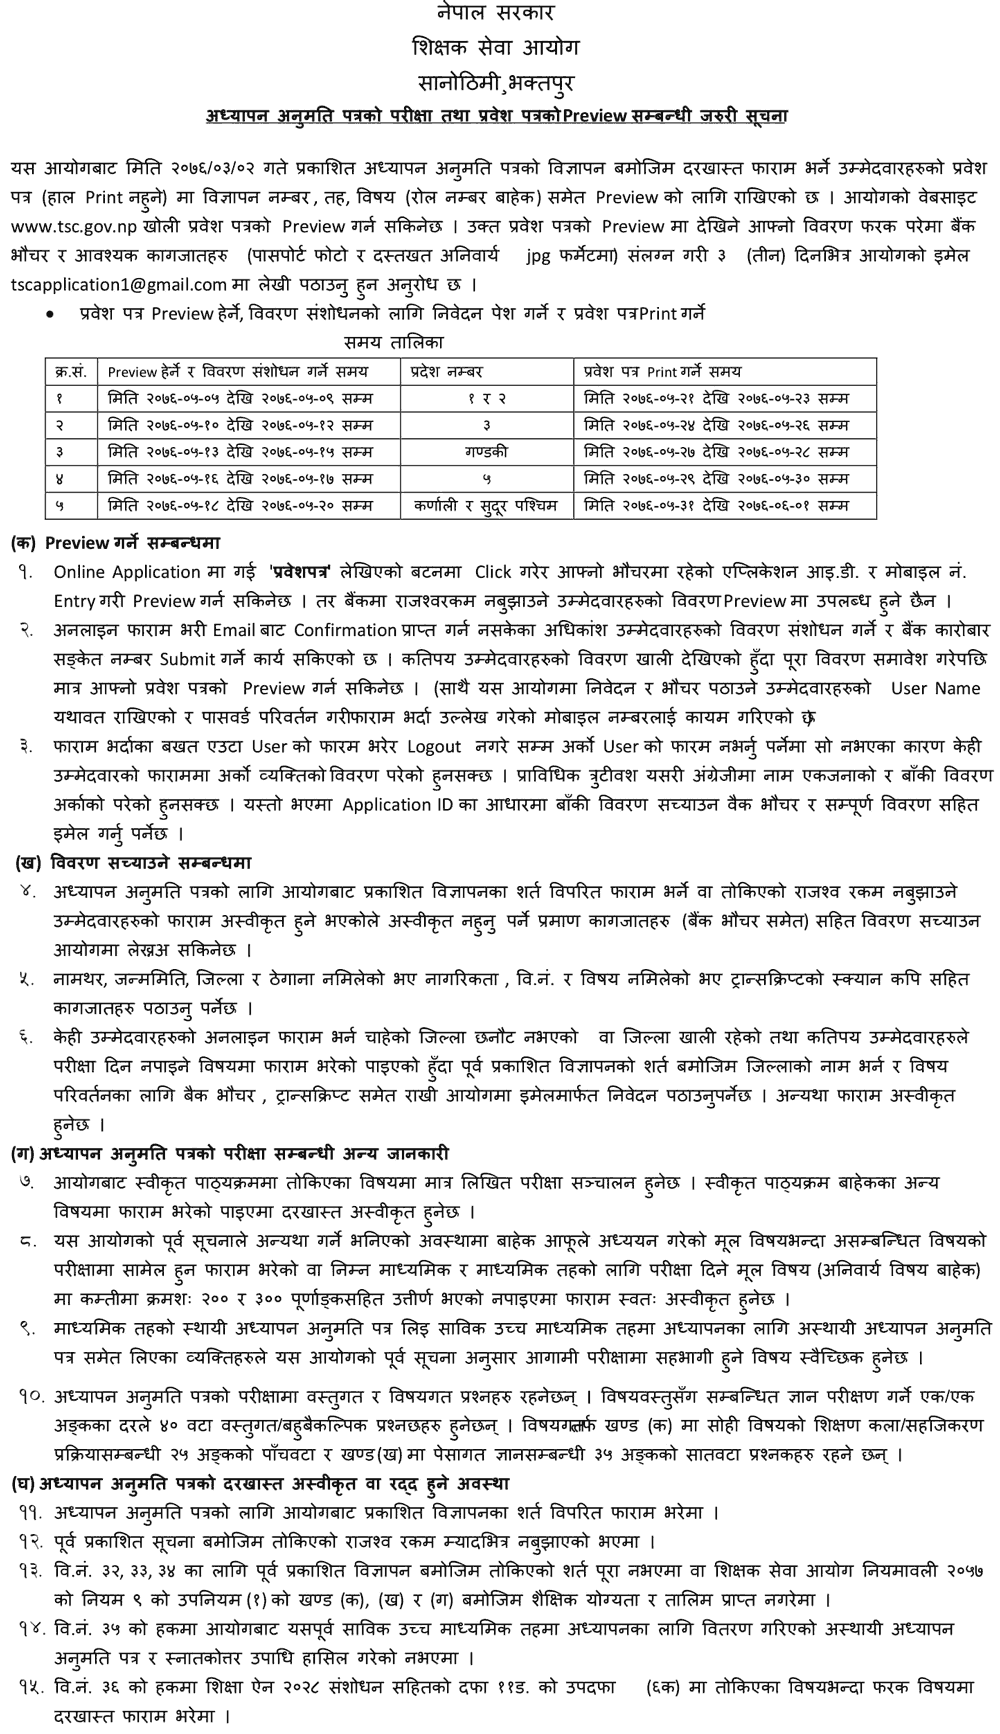 Important Notice for Teaching License Admit Card